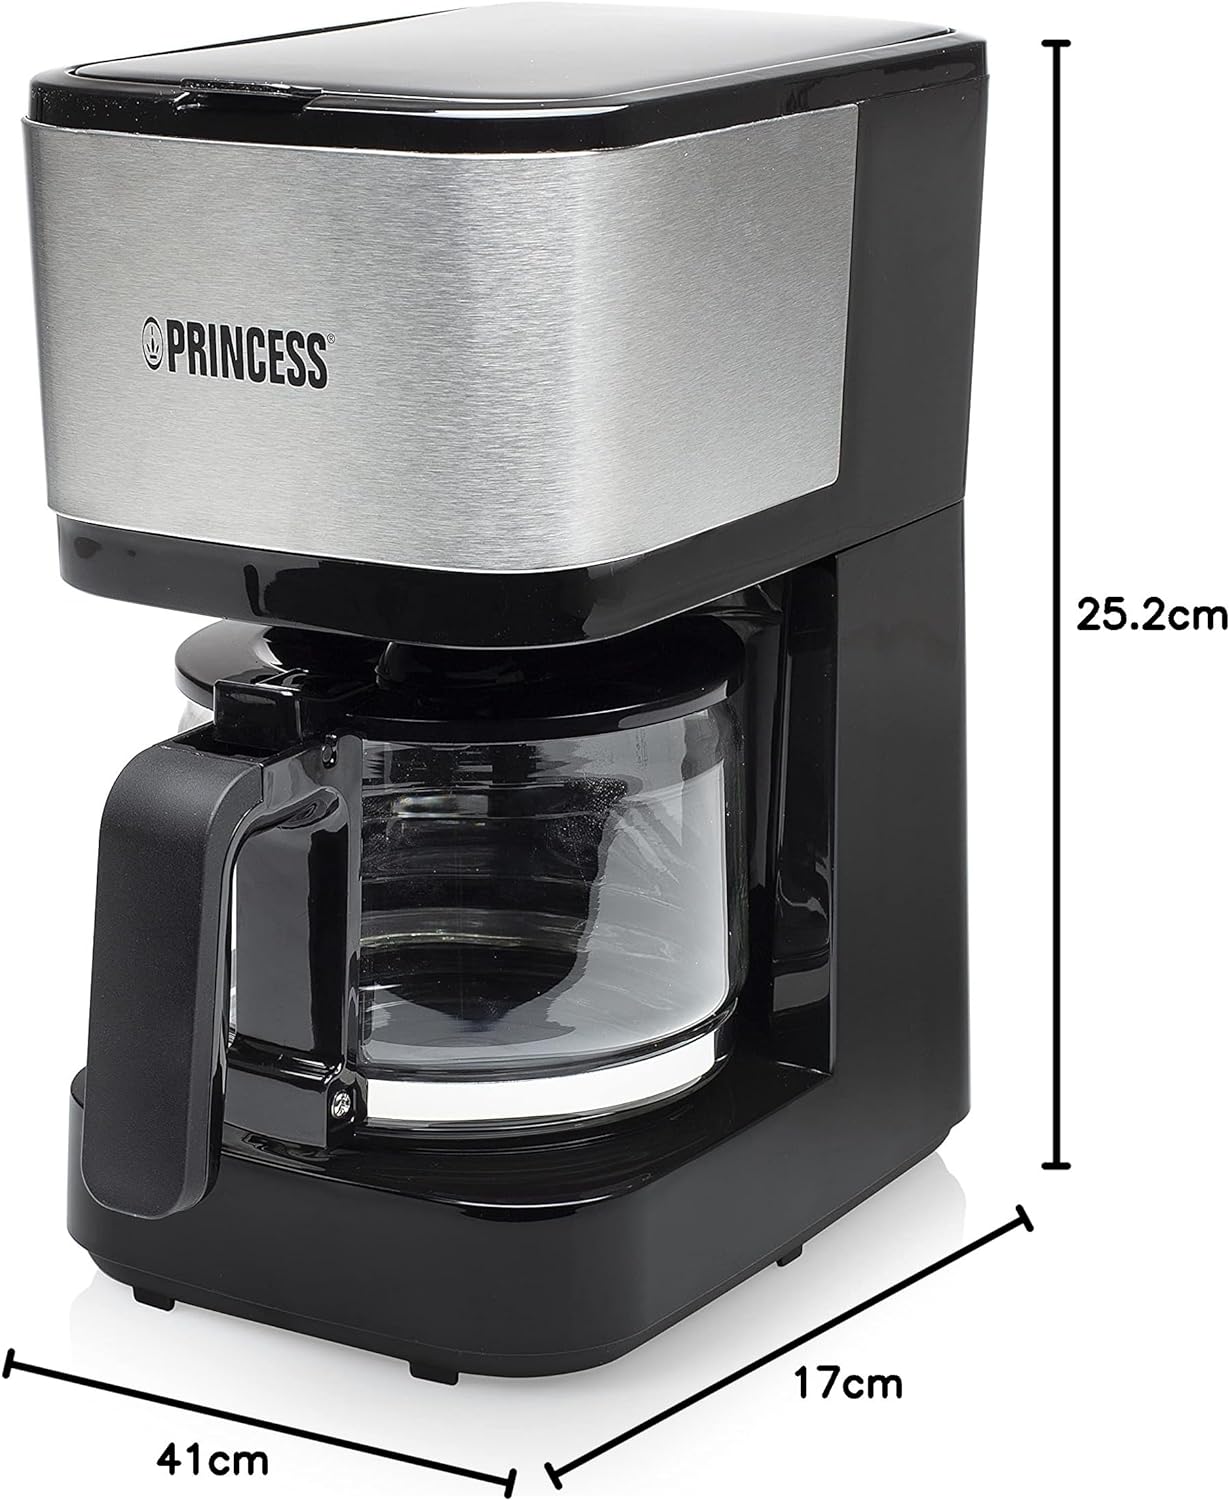 PRINCESS Coffee Maker For 8 Cup 600W